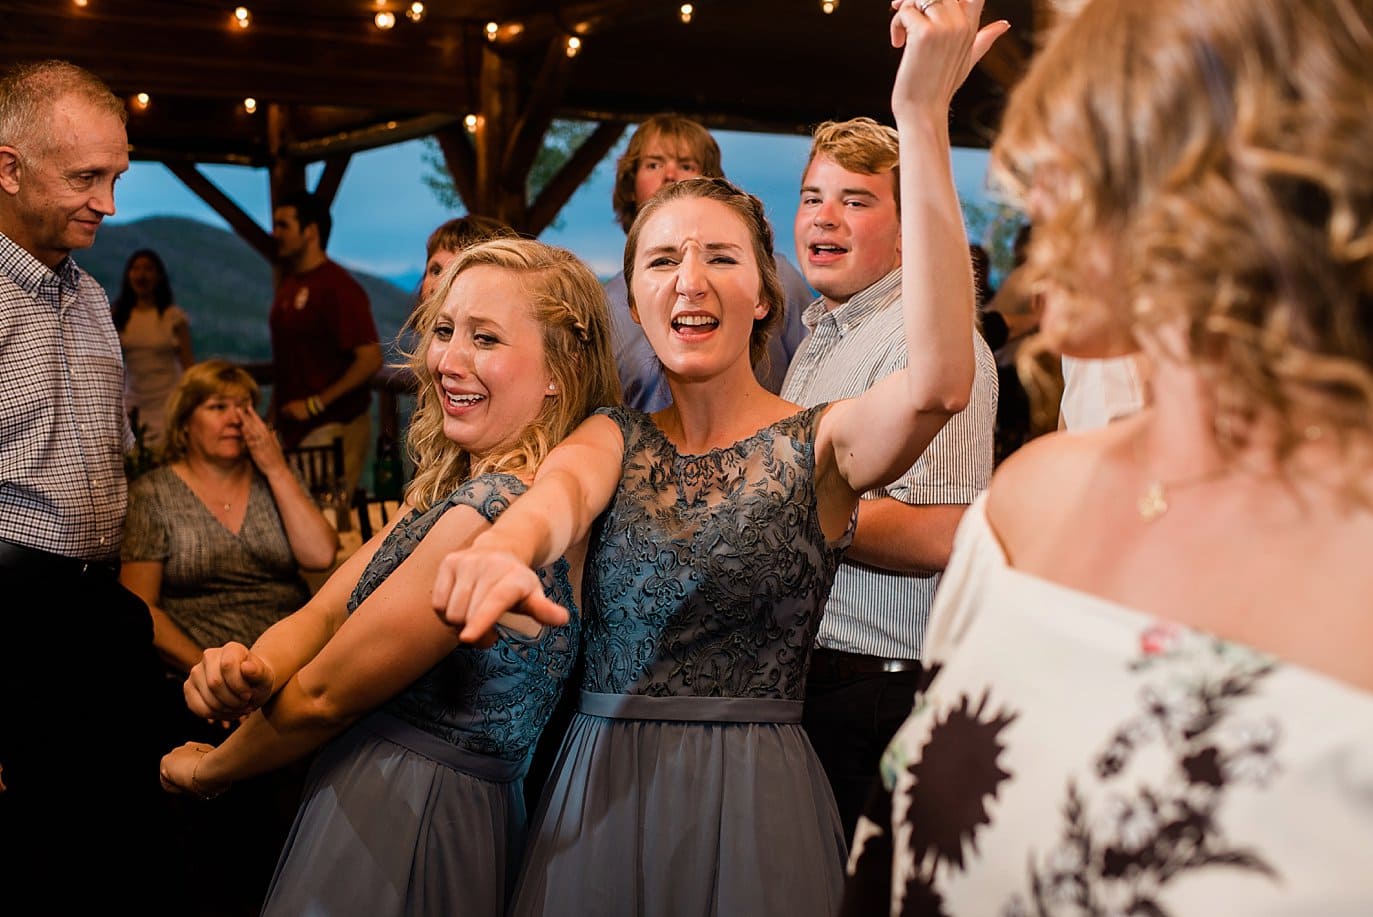 guests dancing at wedding reception at Grand Lake Lodge wedding by Granby wedding photographer Jennie Crate Photographer